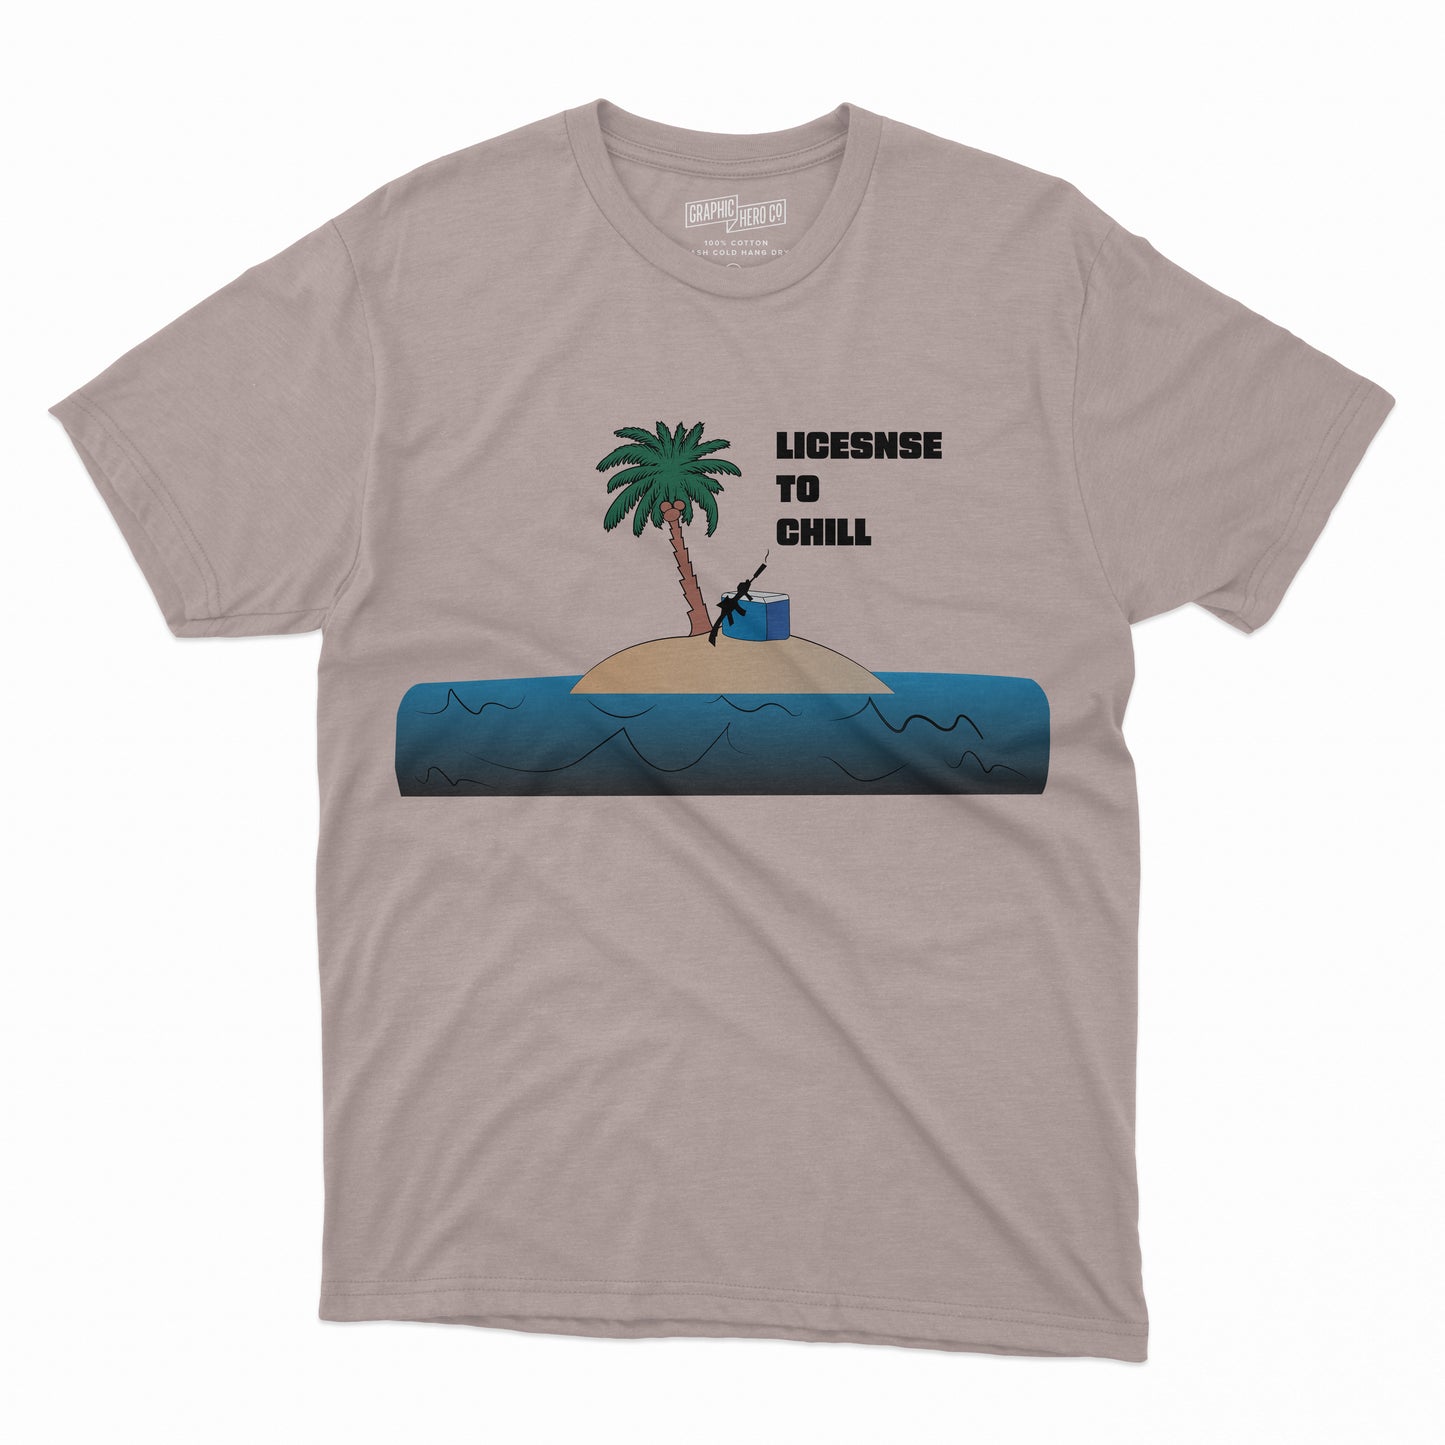 License to Chill Shirt